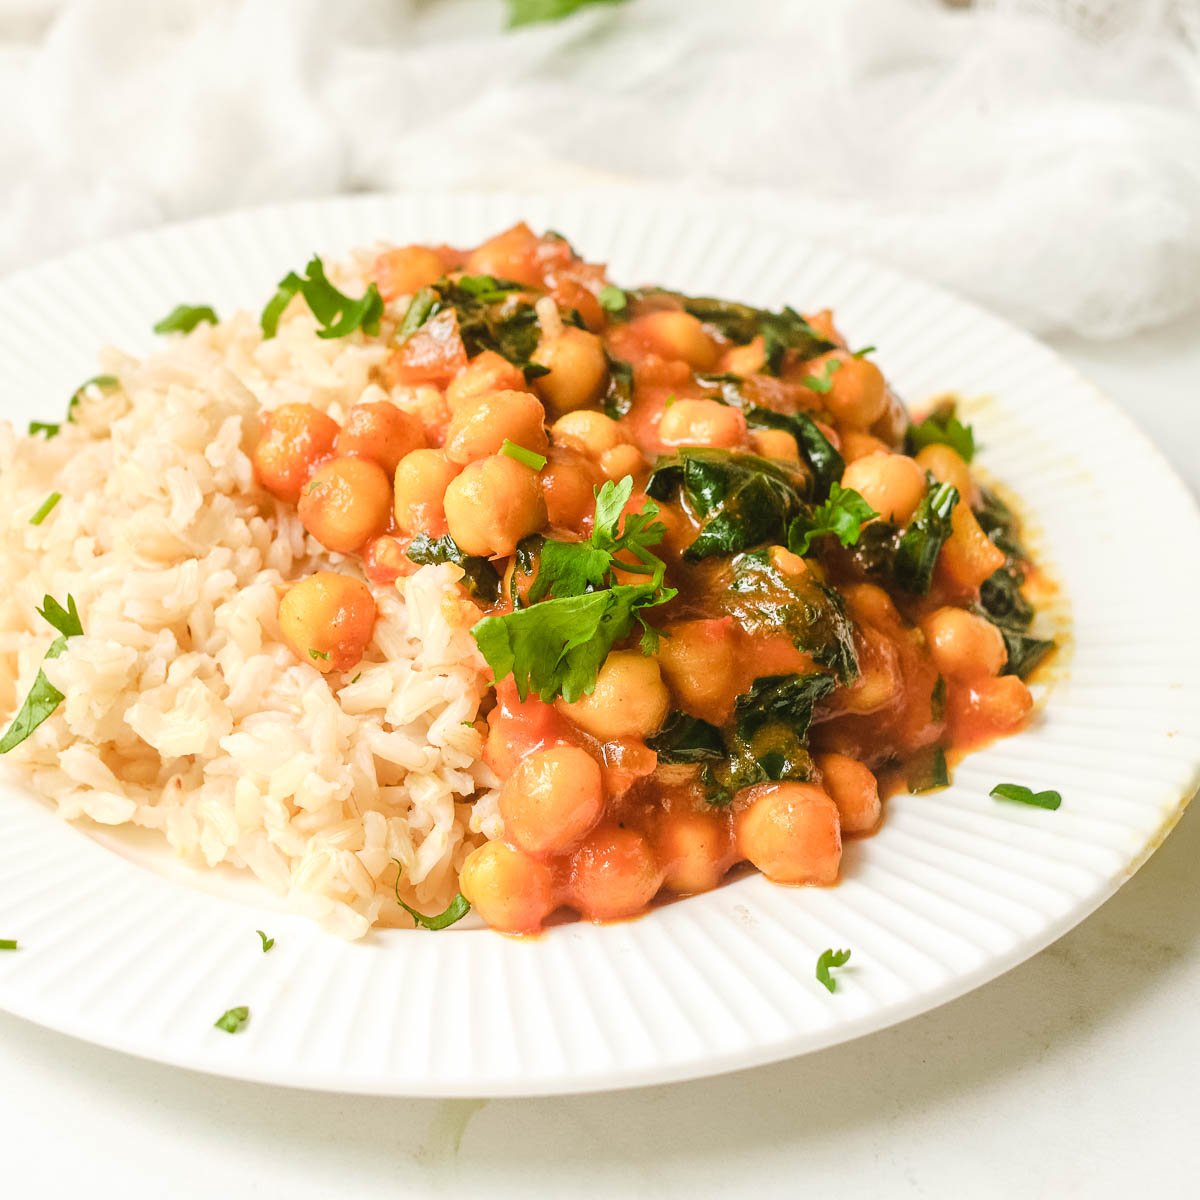 Chickpea spinach curry served on white plate with rice, and garnished with cilantro.
